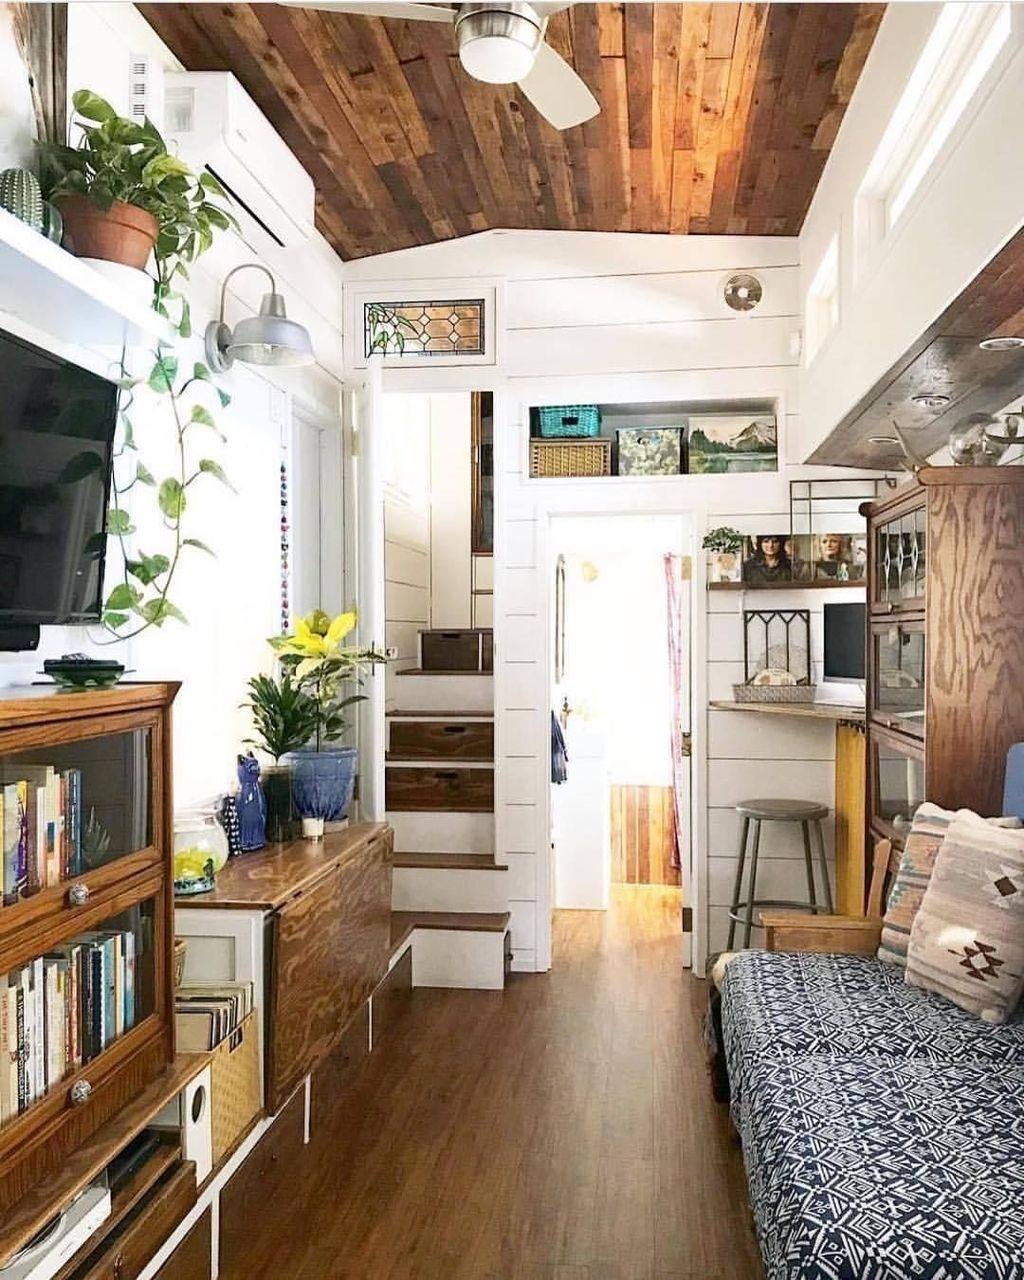 Rustic Tiny House Interior Design Ideas You Must Have 15 